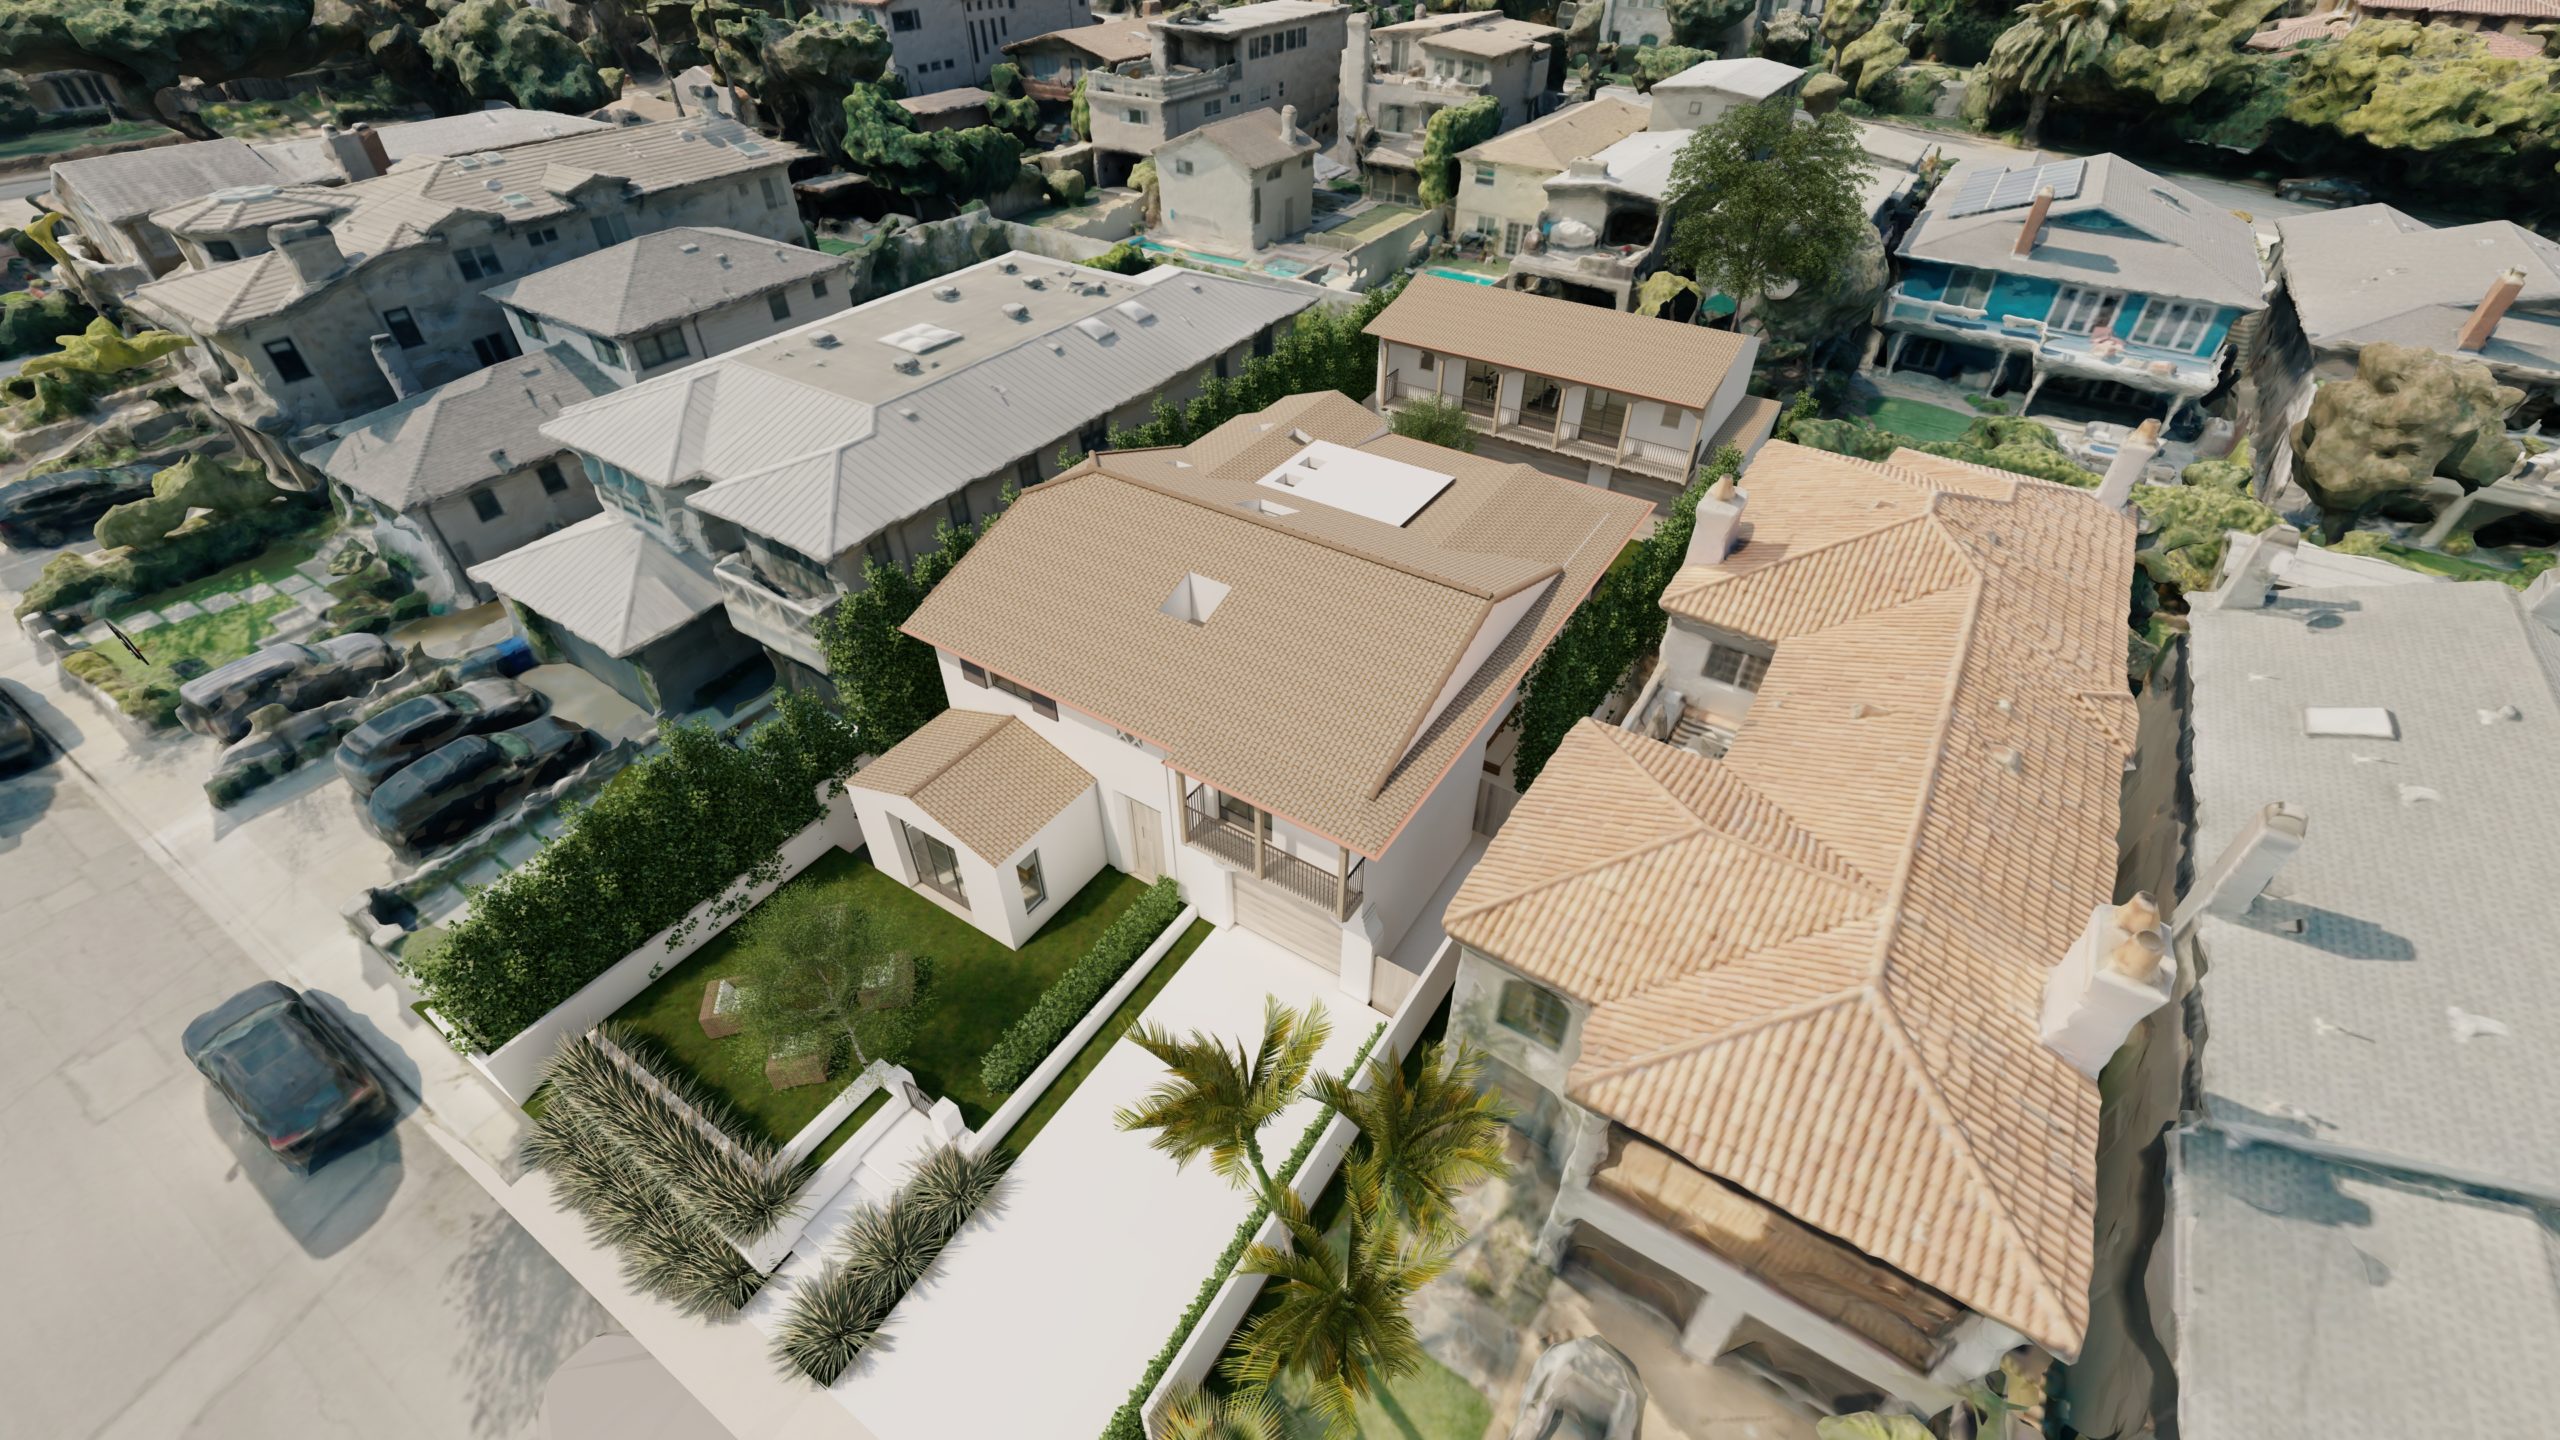 architects 3D rendering placed into a real 3D environment made using a drone